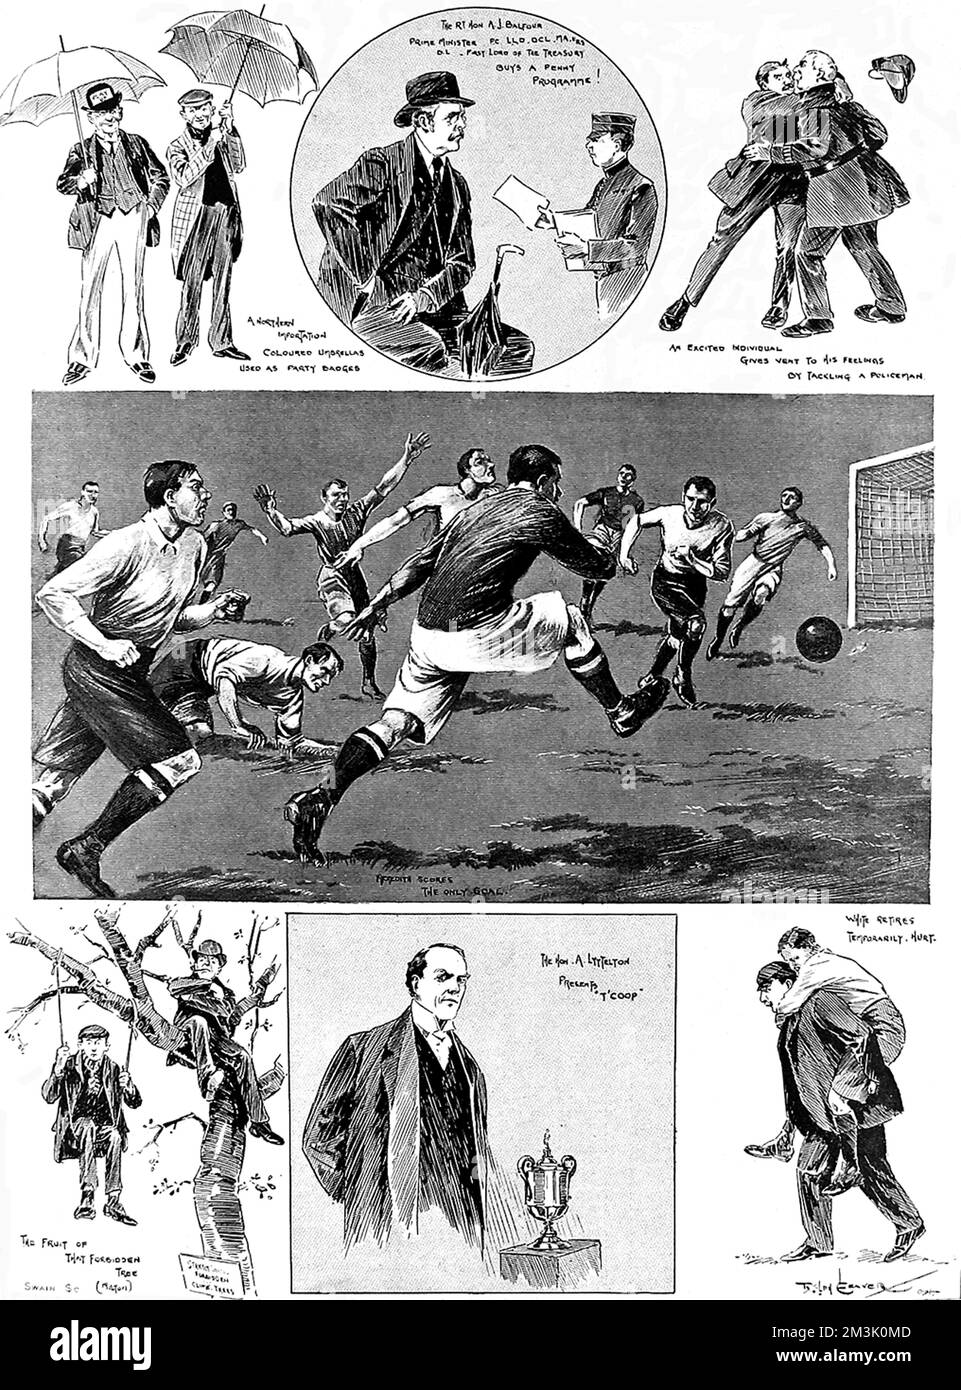 Series of illustrations from the Manchester City vs. Bolton Wanderers F.A. Cup Final at the Crystal Palace ground, London, 23rd April 1904. Billy Meredith can be seen scoring the only goal of the game for Manchester in the centre image.   The other images show (clockwise from top left): two fans and their umbrellas; British Prime Minister Arthur Balfour buying a programme; an excited fan embracing a policeman; White of Bolton Wanderers being helped from the pitch; the Hon. A. Lyttelton ready to present the F.A. Cup; two fans watching the game from a nearby tree.  1904 Stock Photo